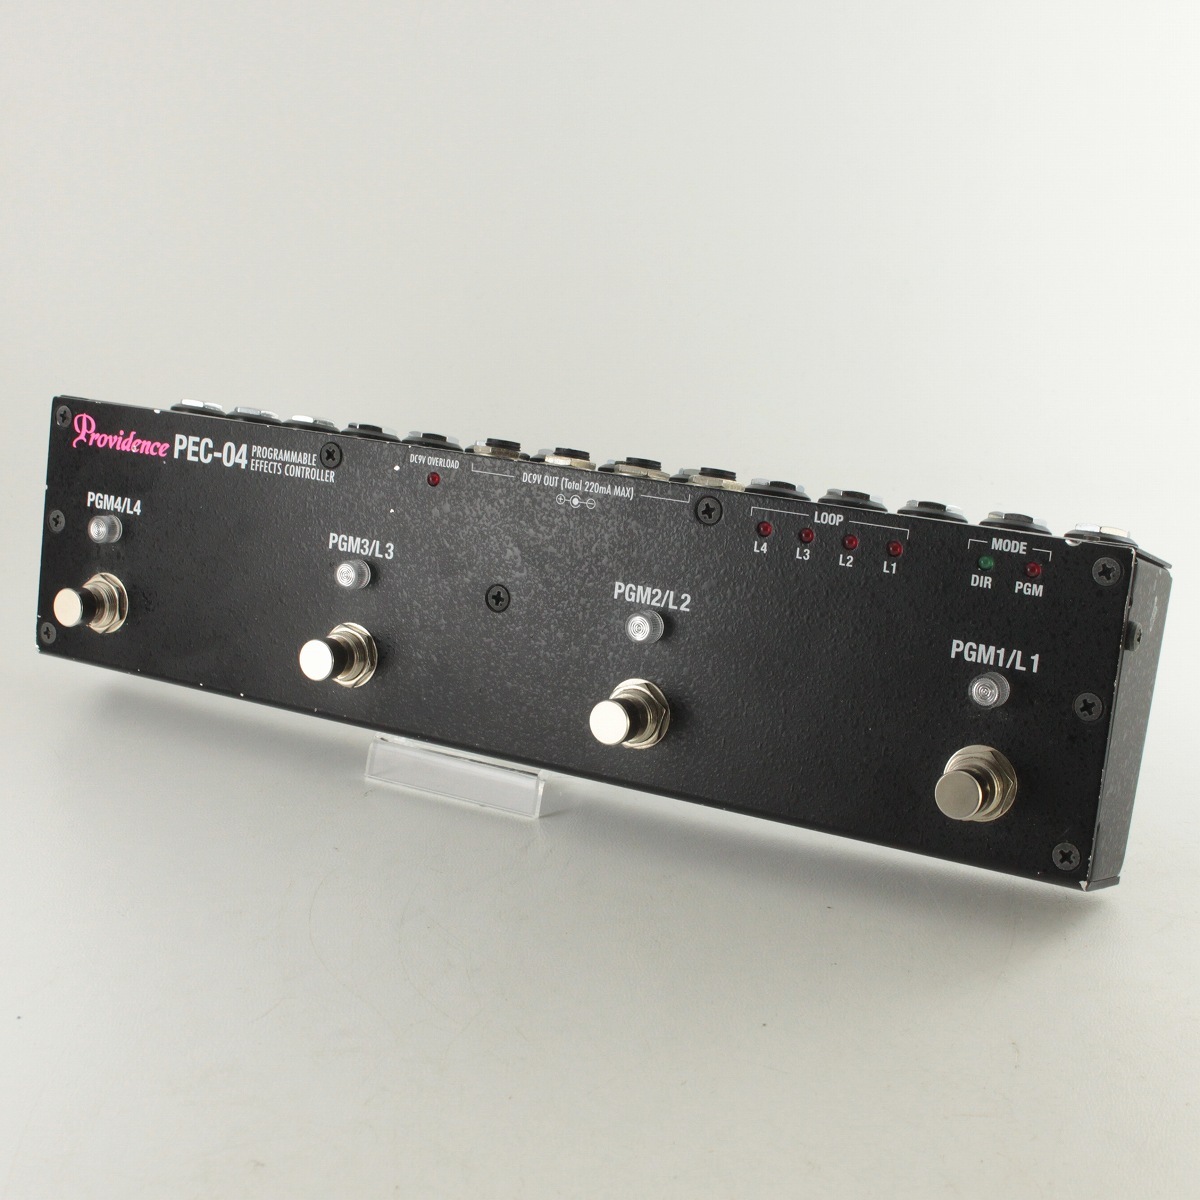 Providence PEC-04 Programmable Effects Controller 【御茶ノ水本店 